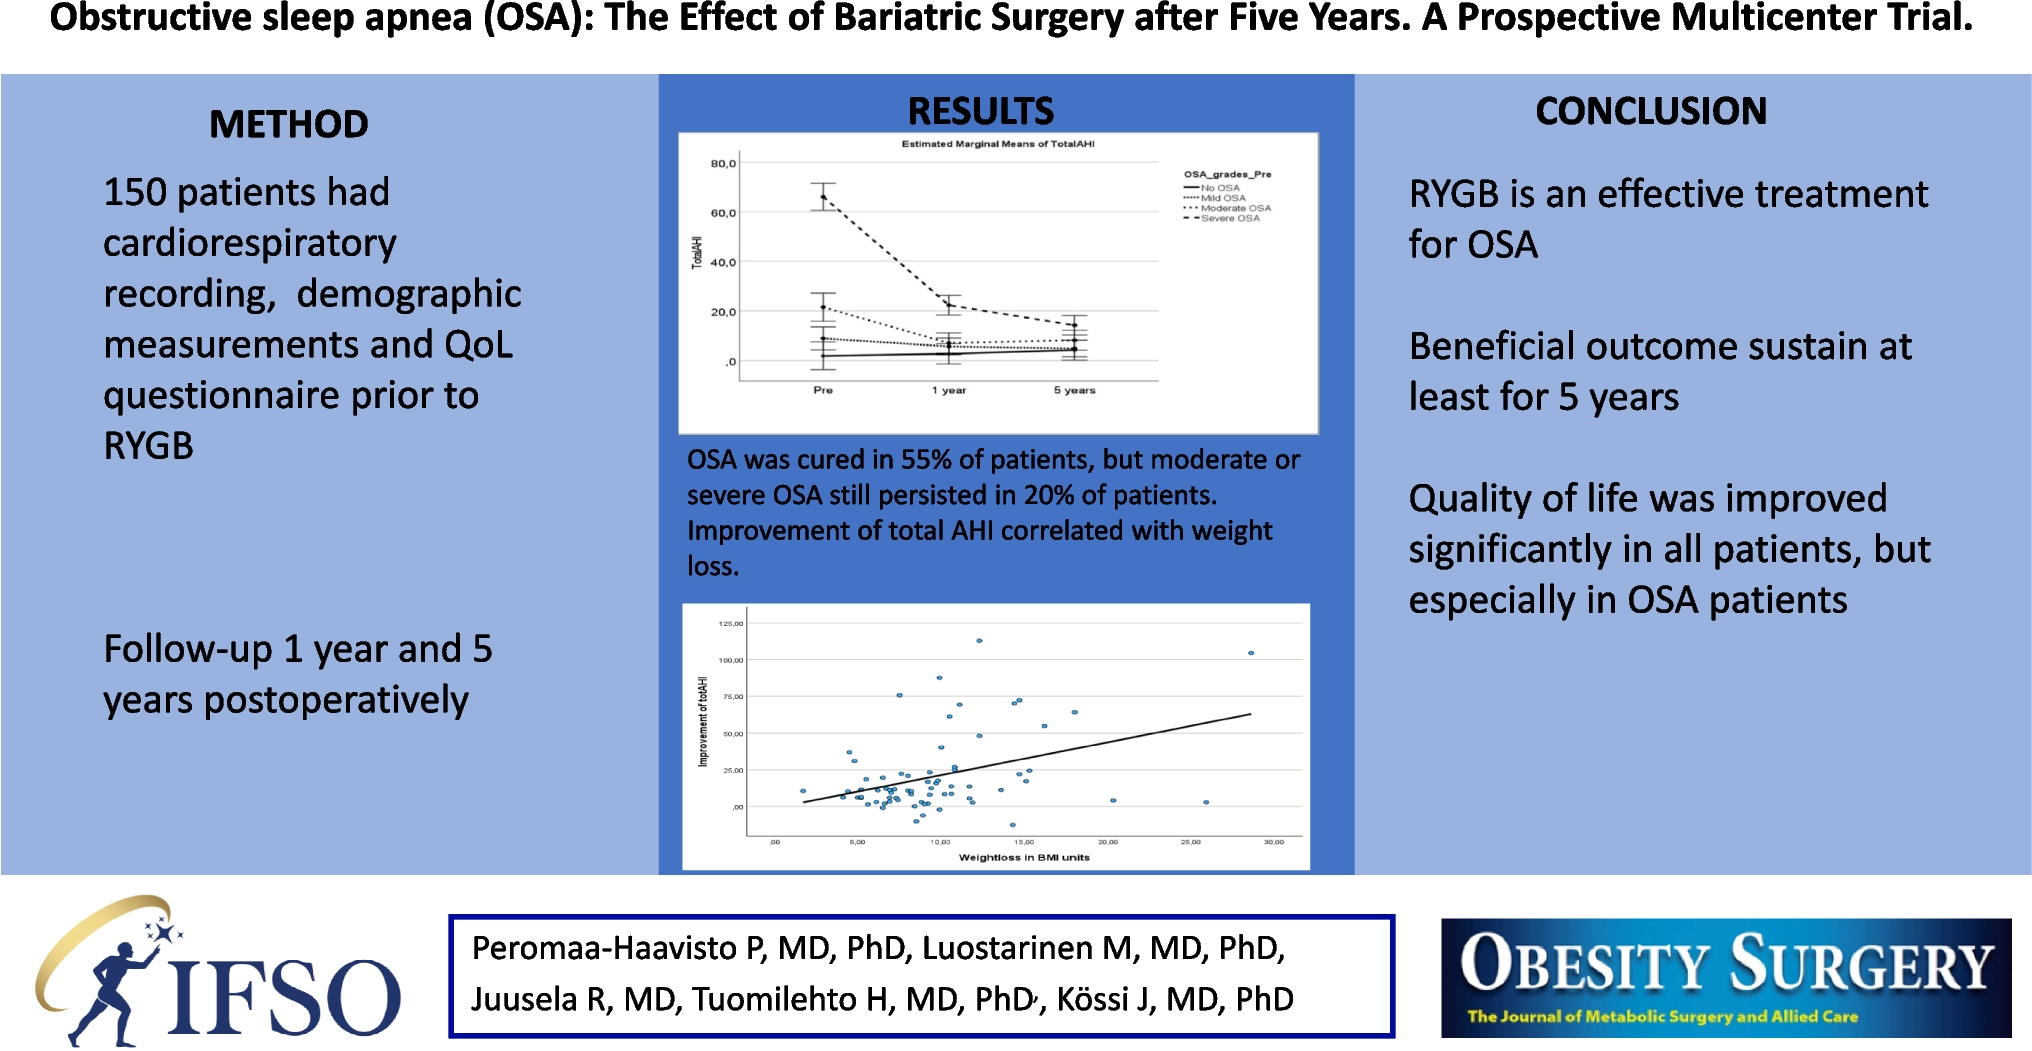 Obstructive Sleep Apnea: The Effect of Bariatric Surgery After Five Years—A Prospective Multicenter Trial